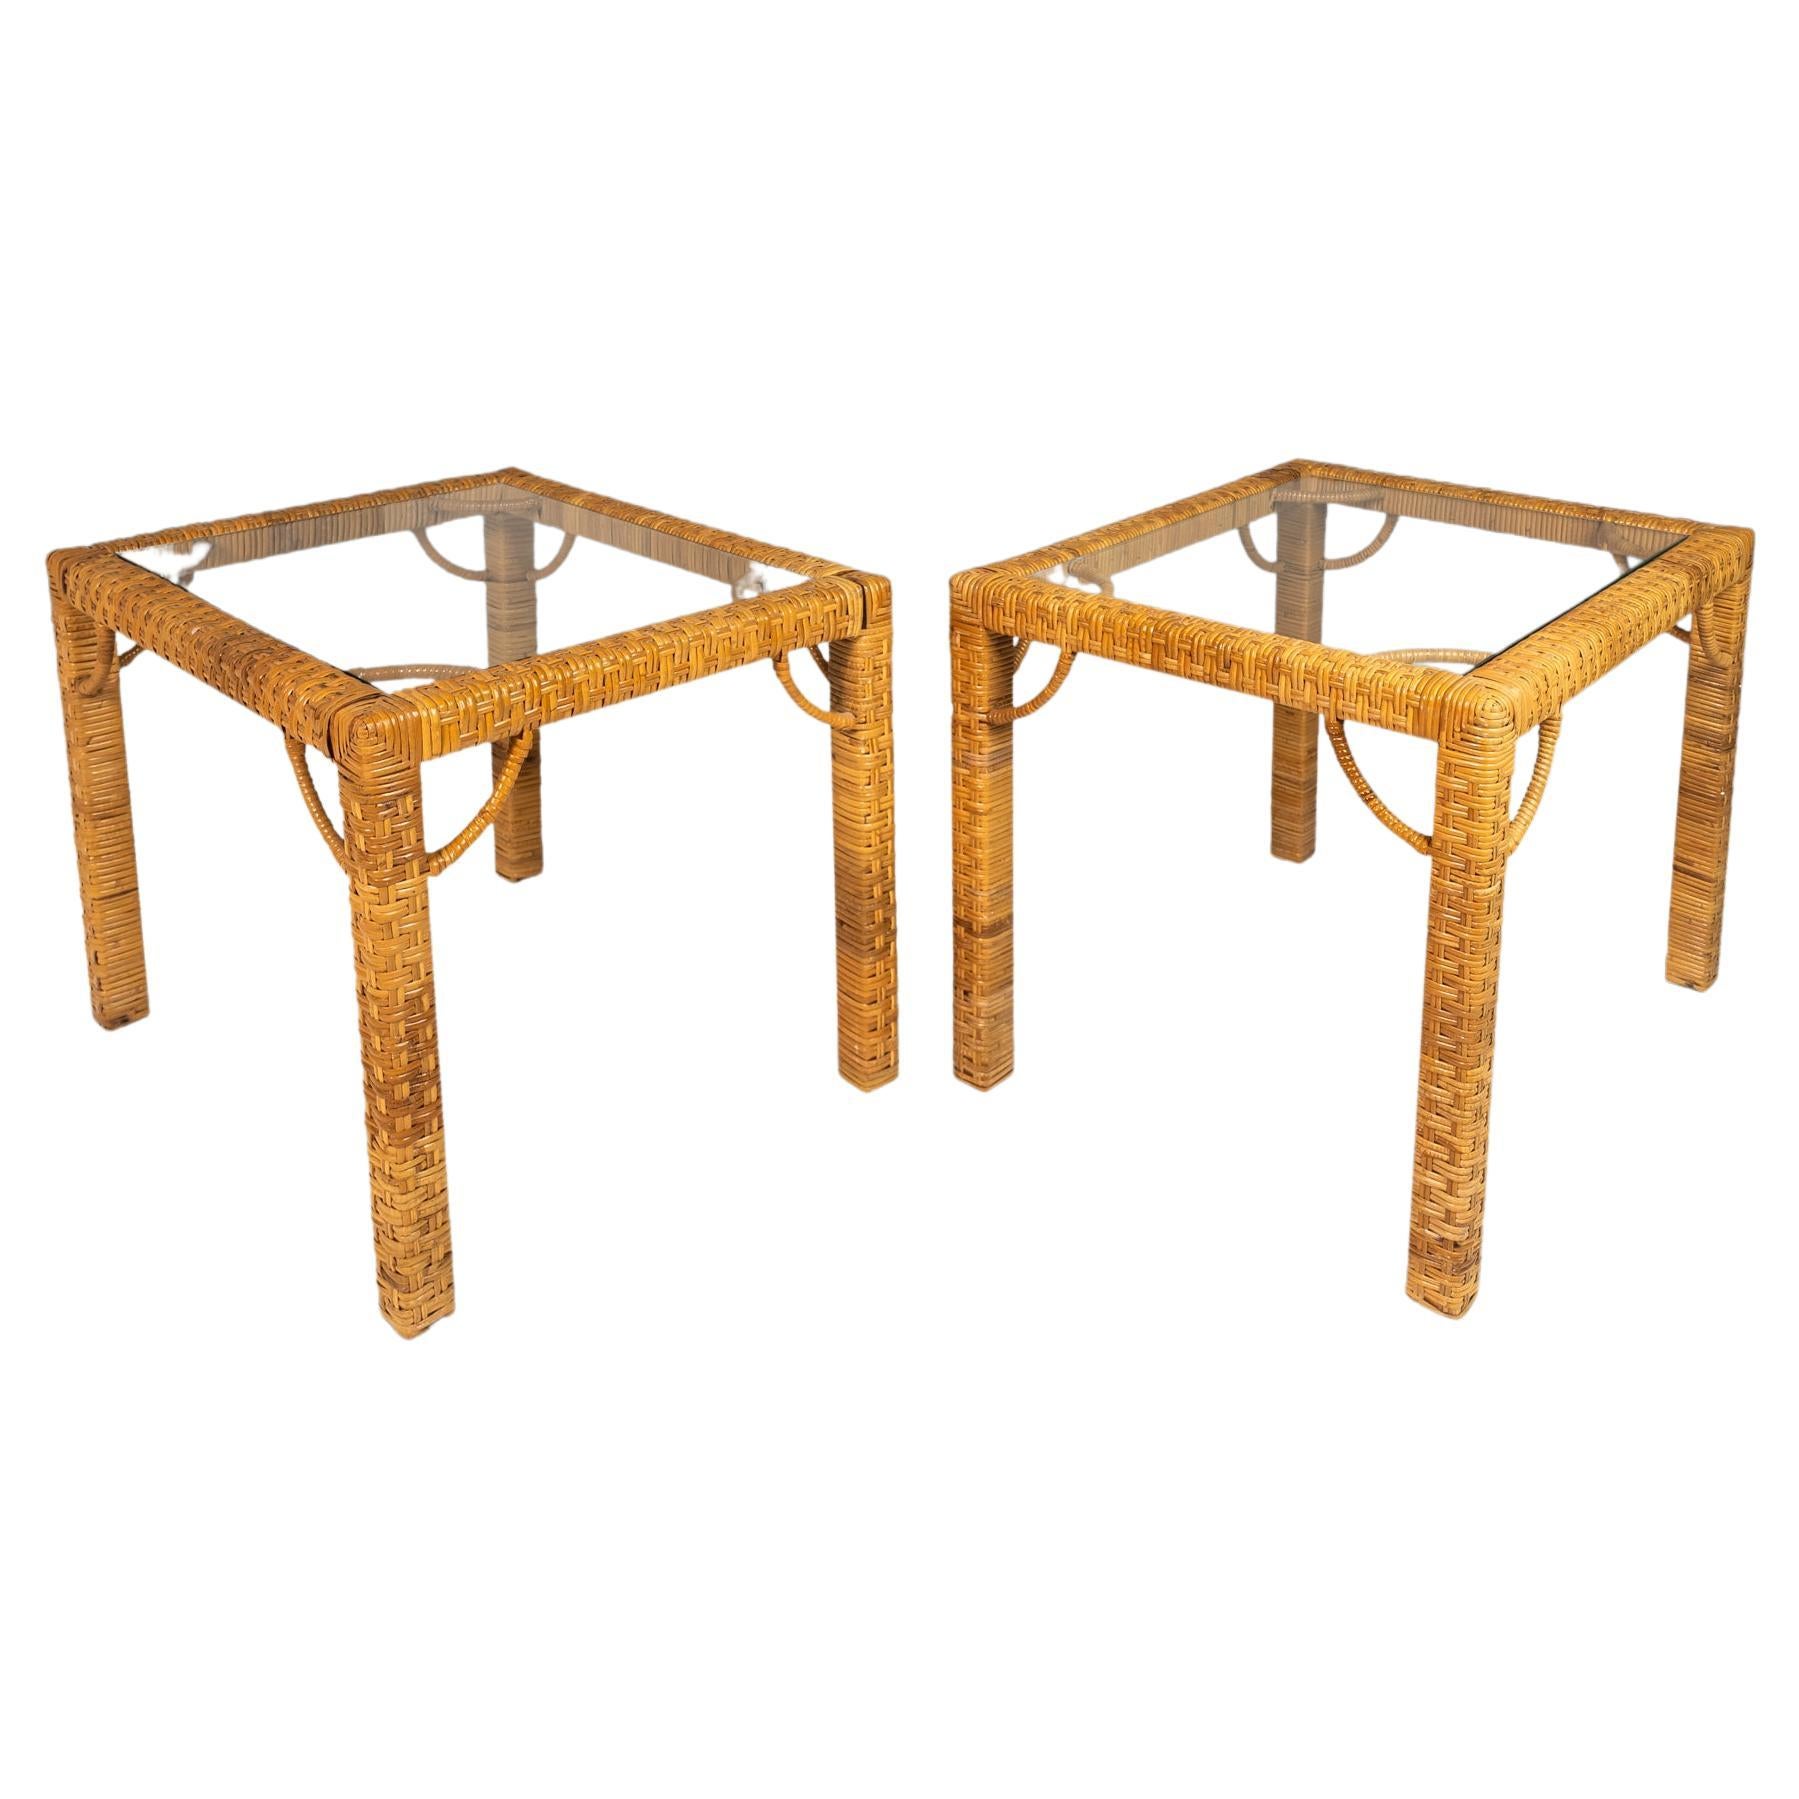 Set of 2 End Tables in Wicker w/ Glass Tops Attributed Bieckley Brothers Rattan